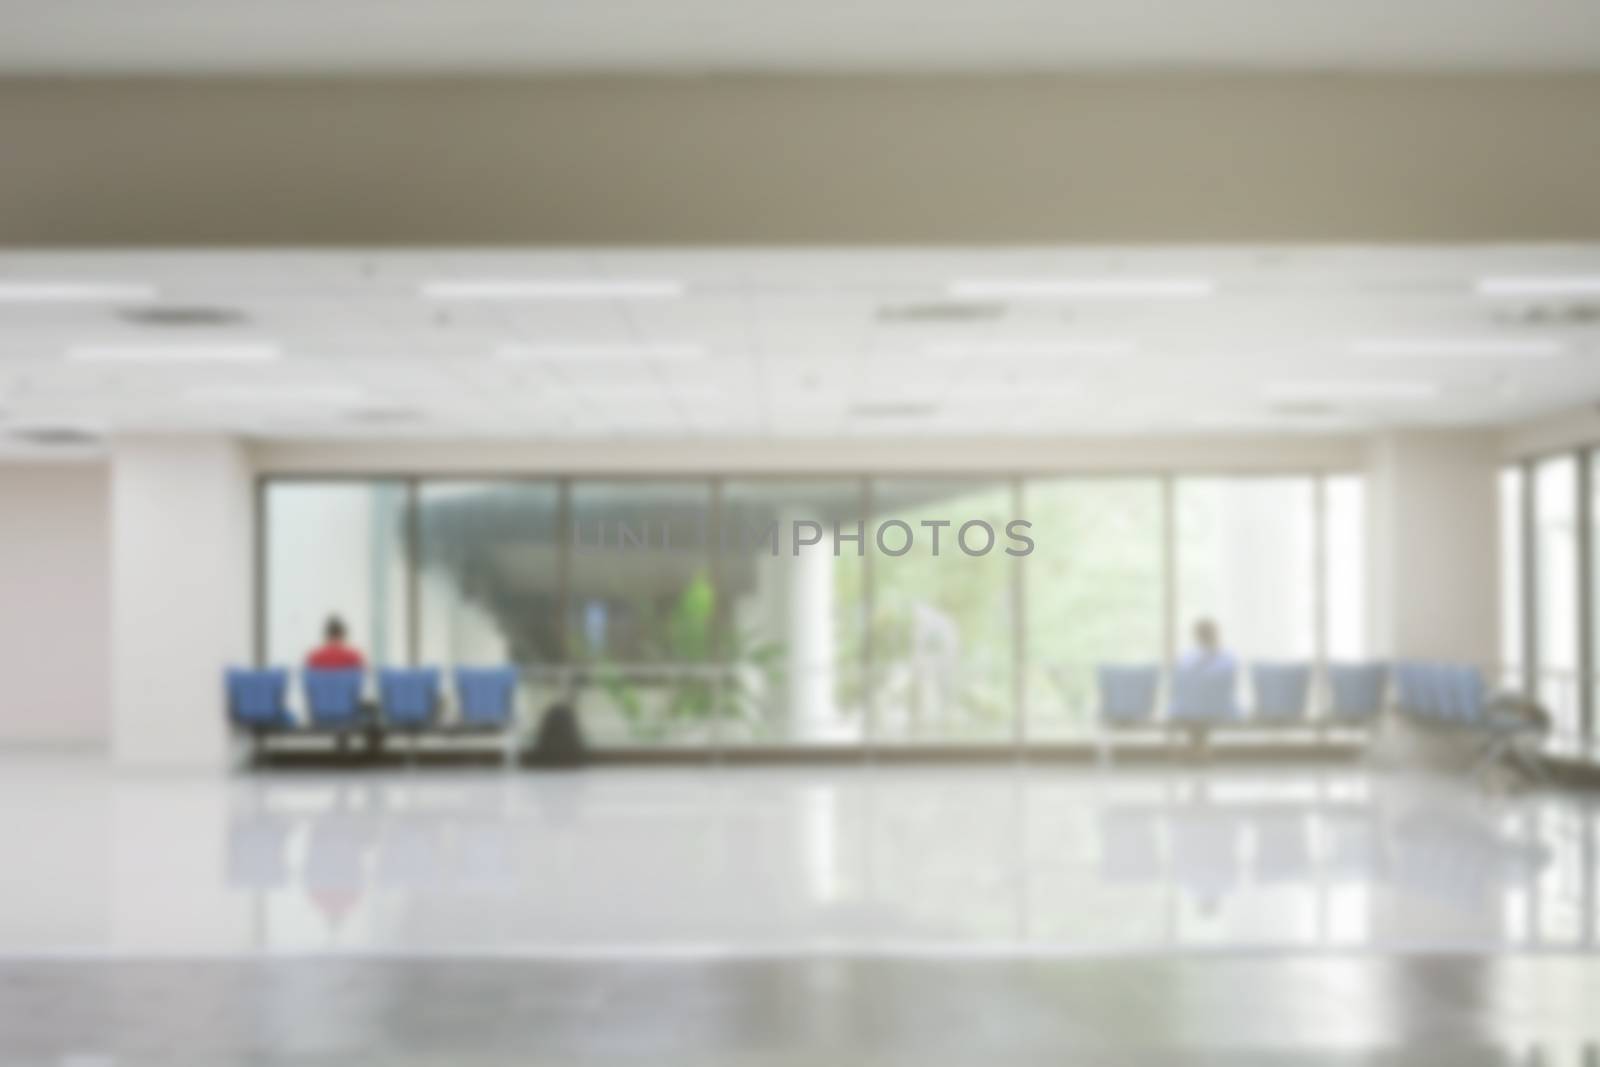 departure lobby lounge at the airport by rakoptonLPN